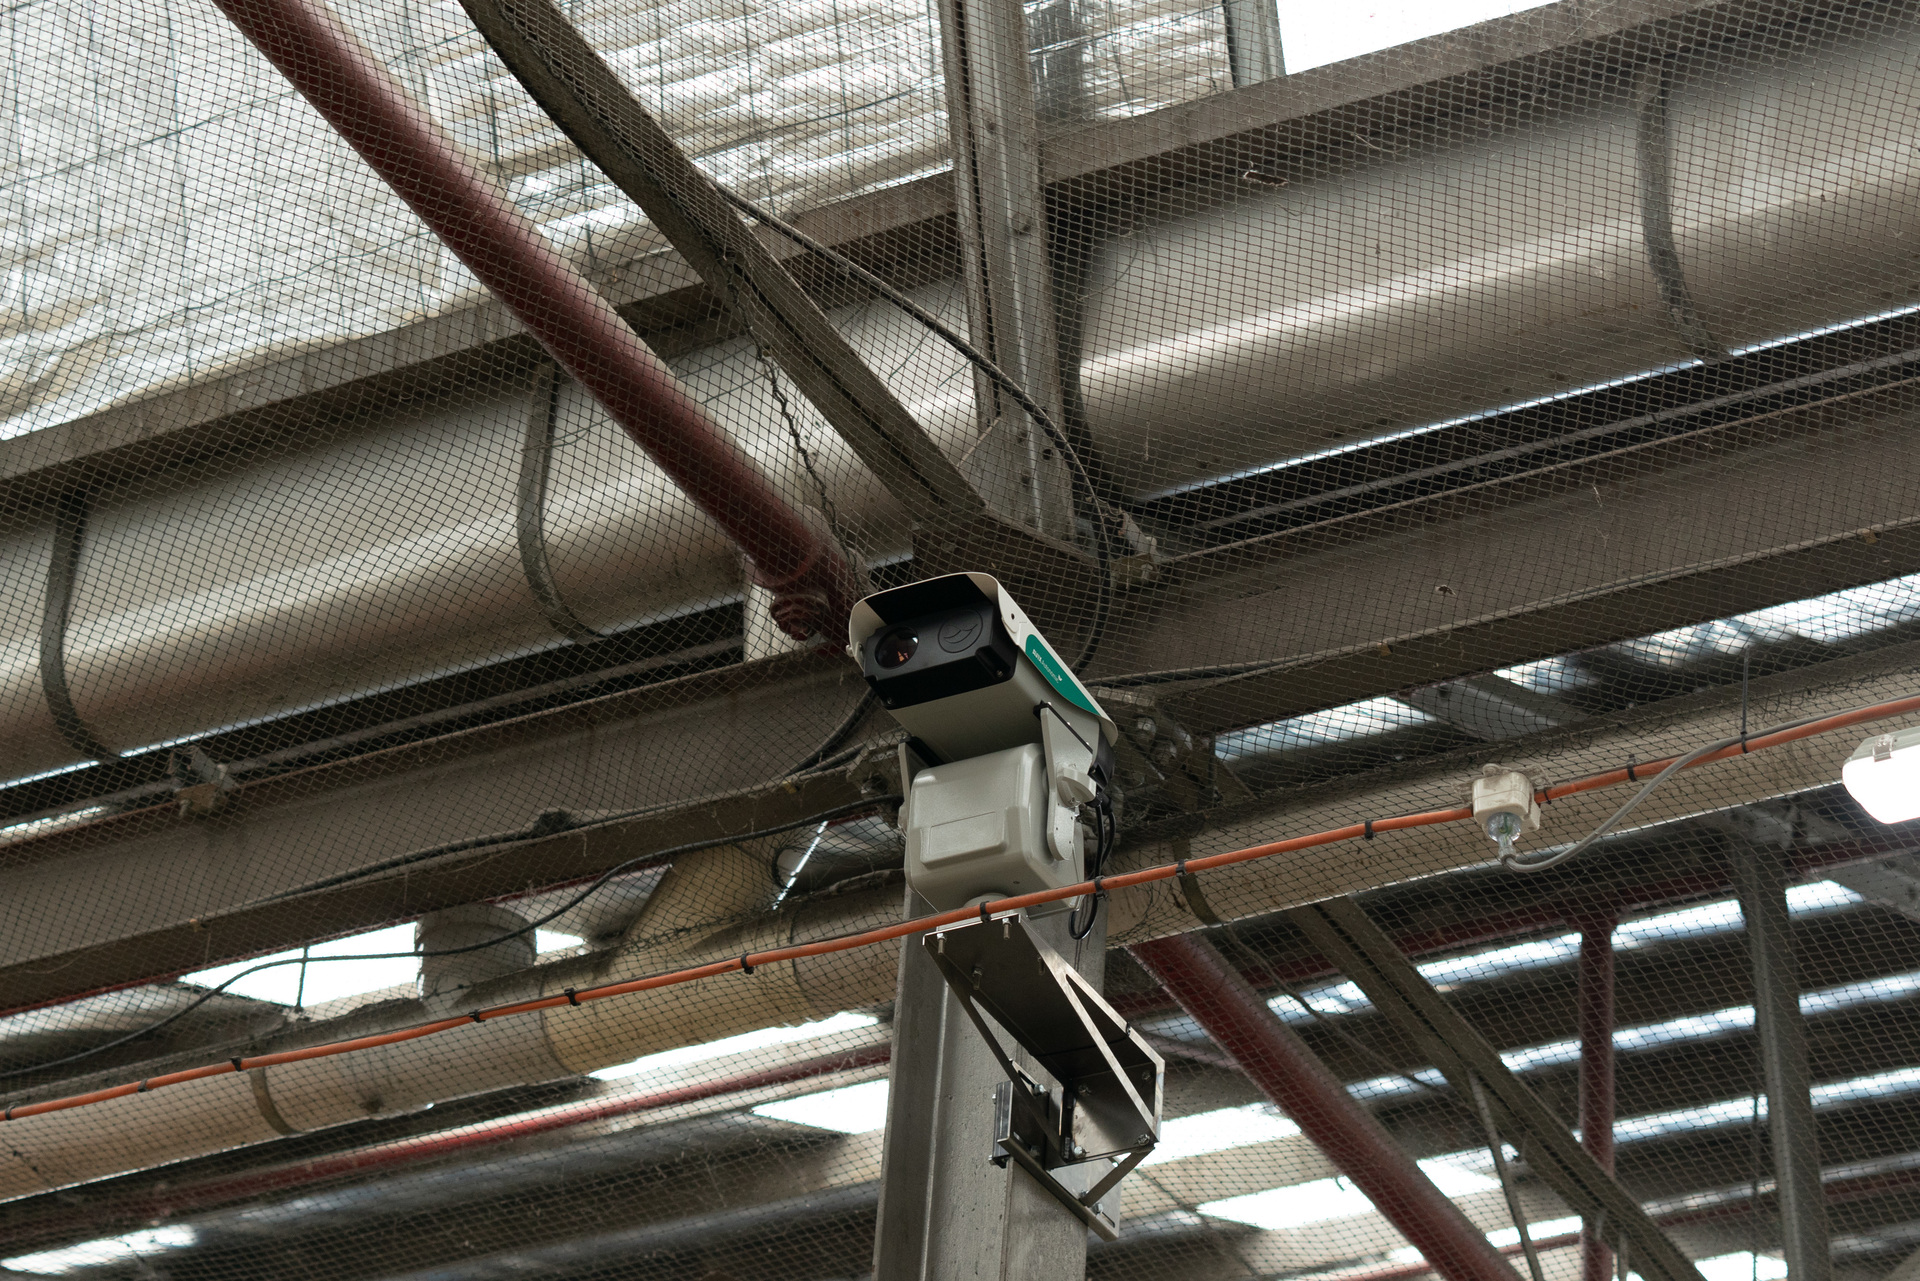 The bird laser in action within Malvern Tram Depot - optical illusions are used to discourage roosting